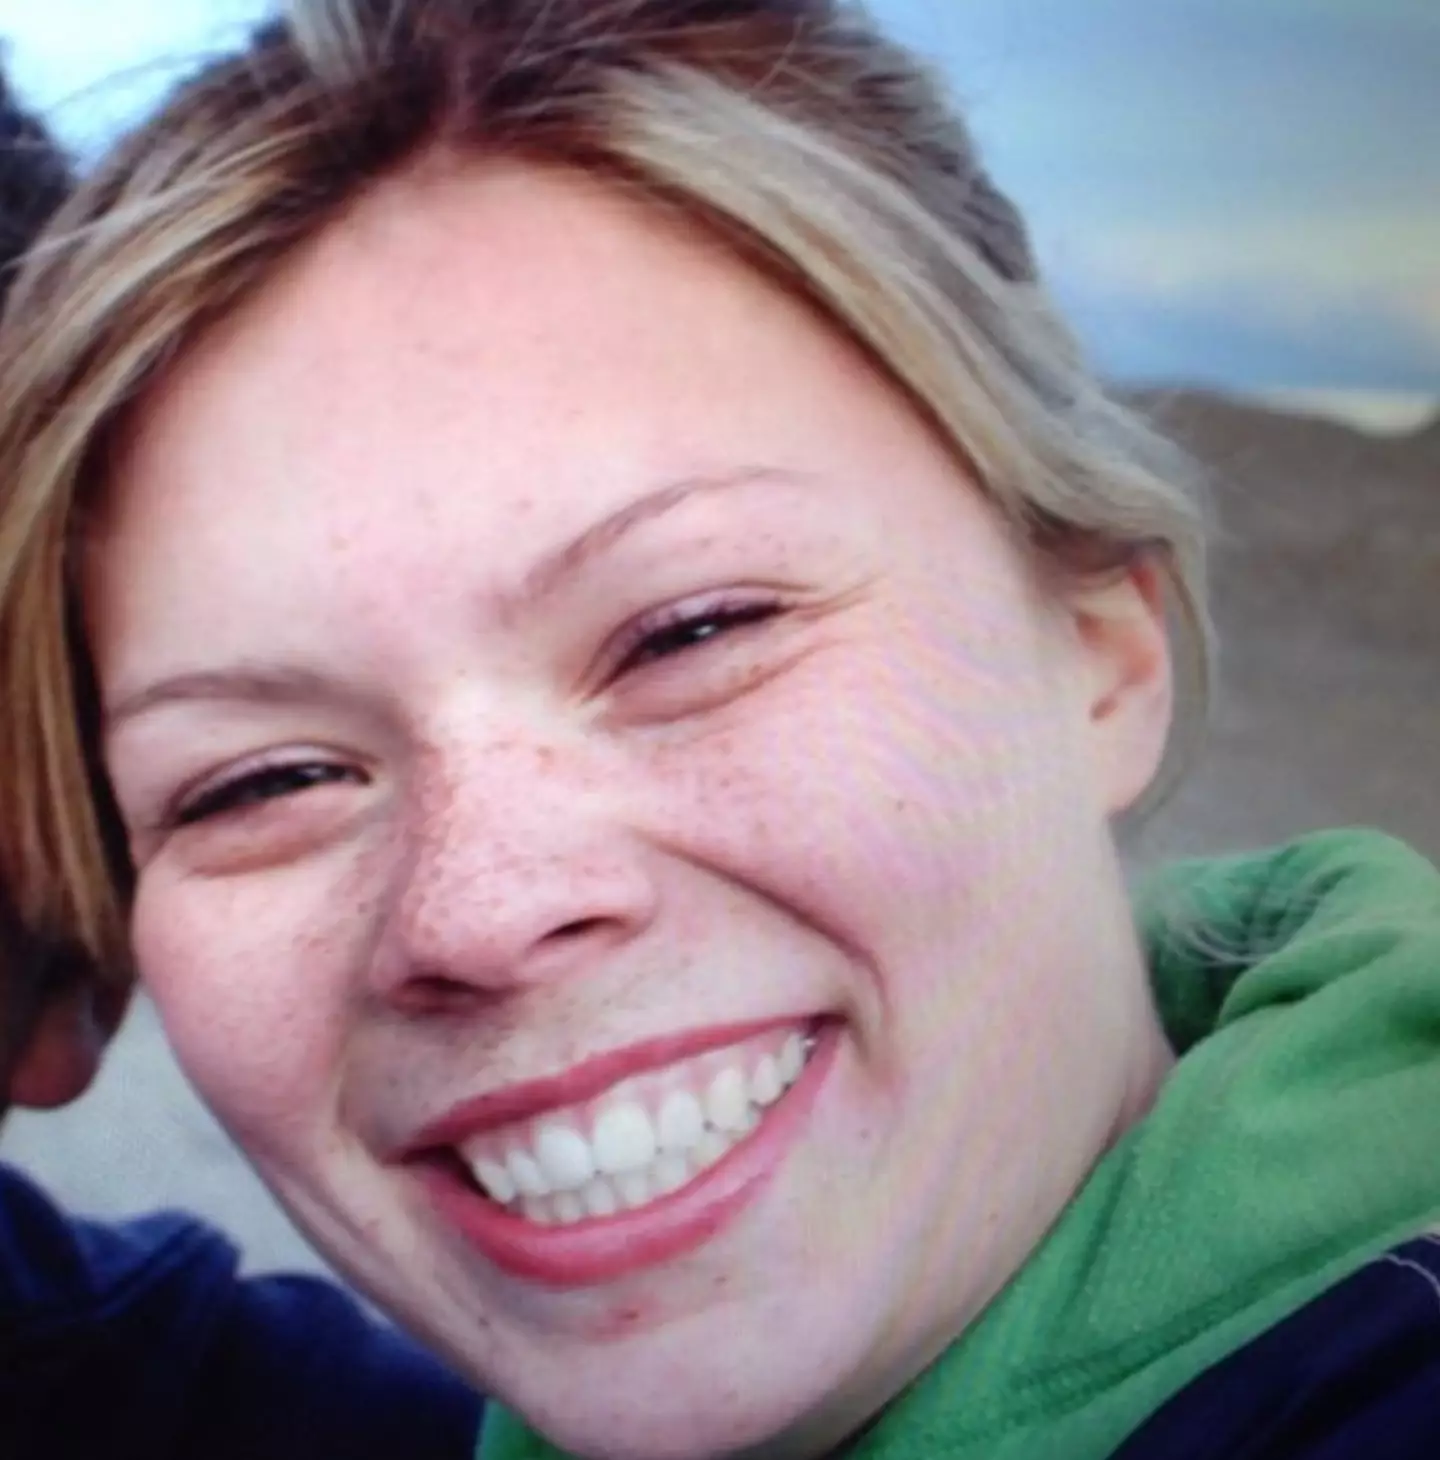 The RCMP have identified the remains of Madison Scott, who had been missing for 12 years.